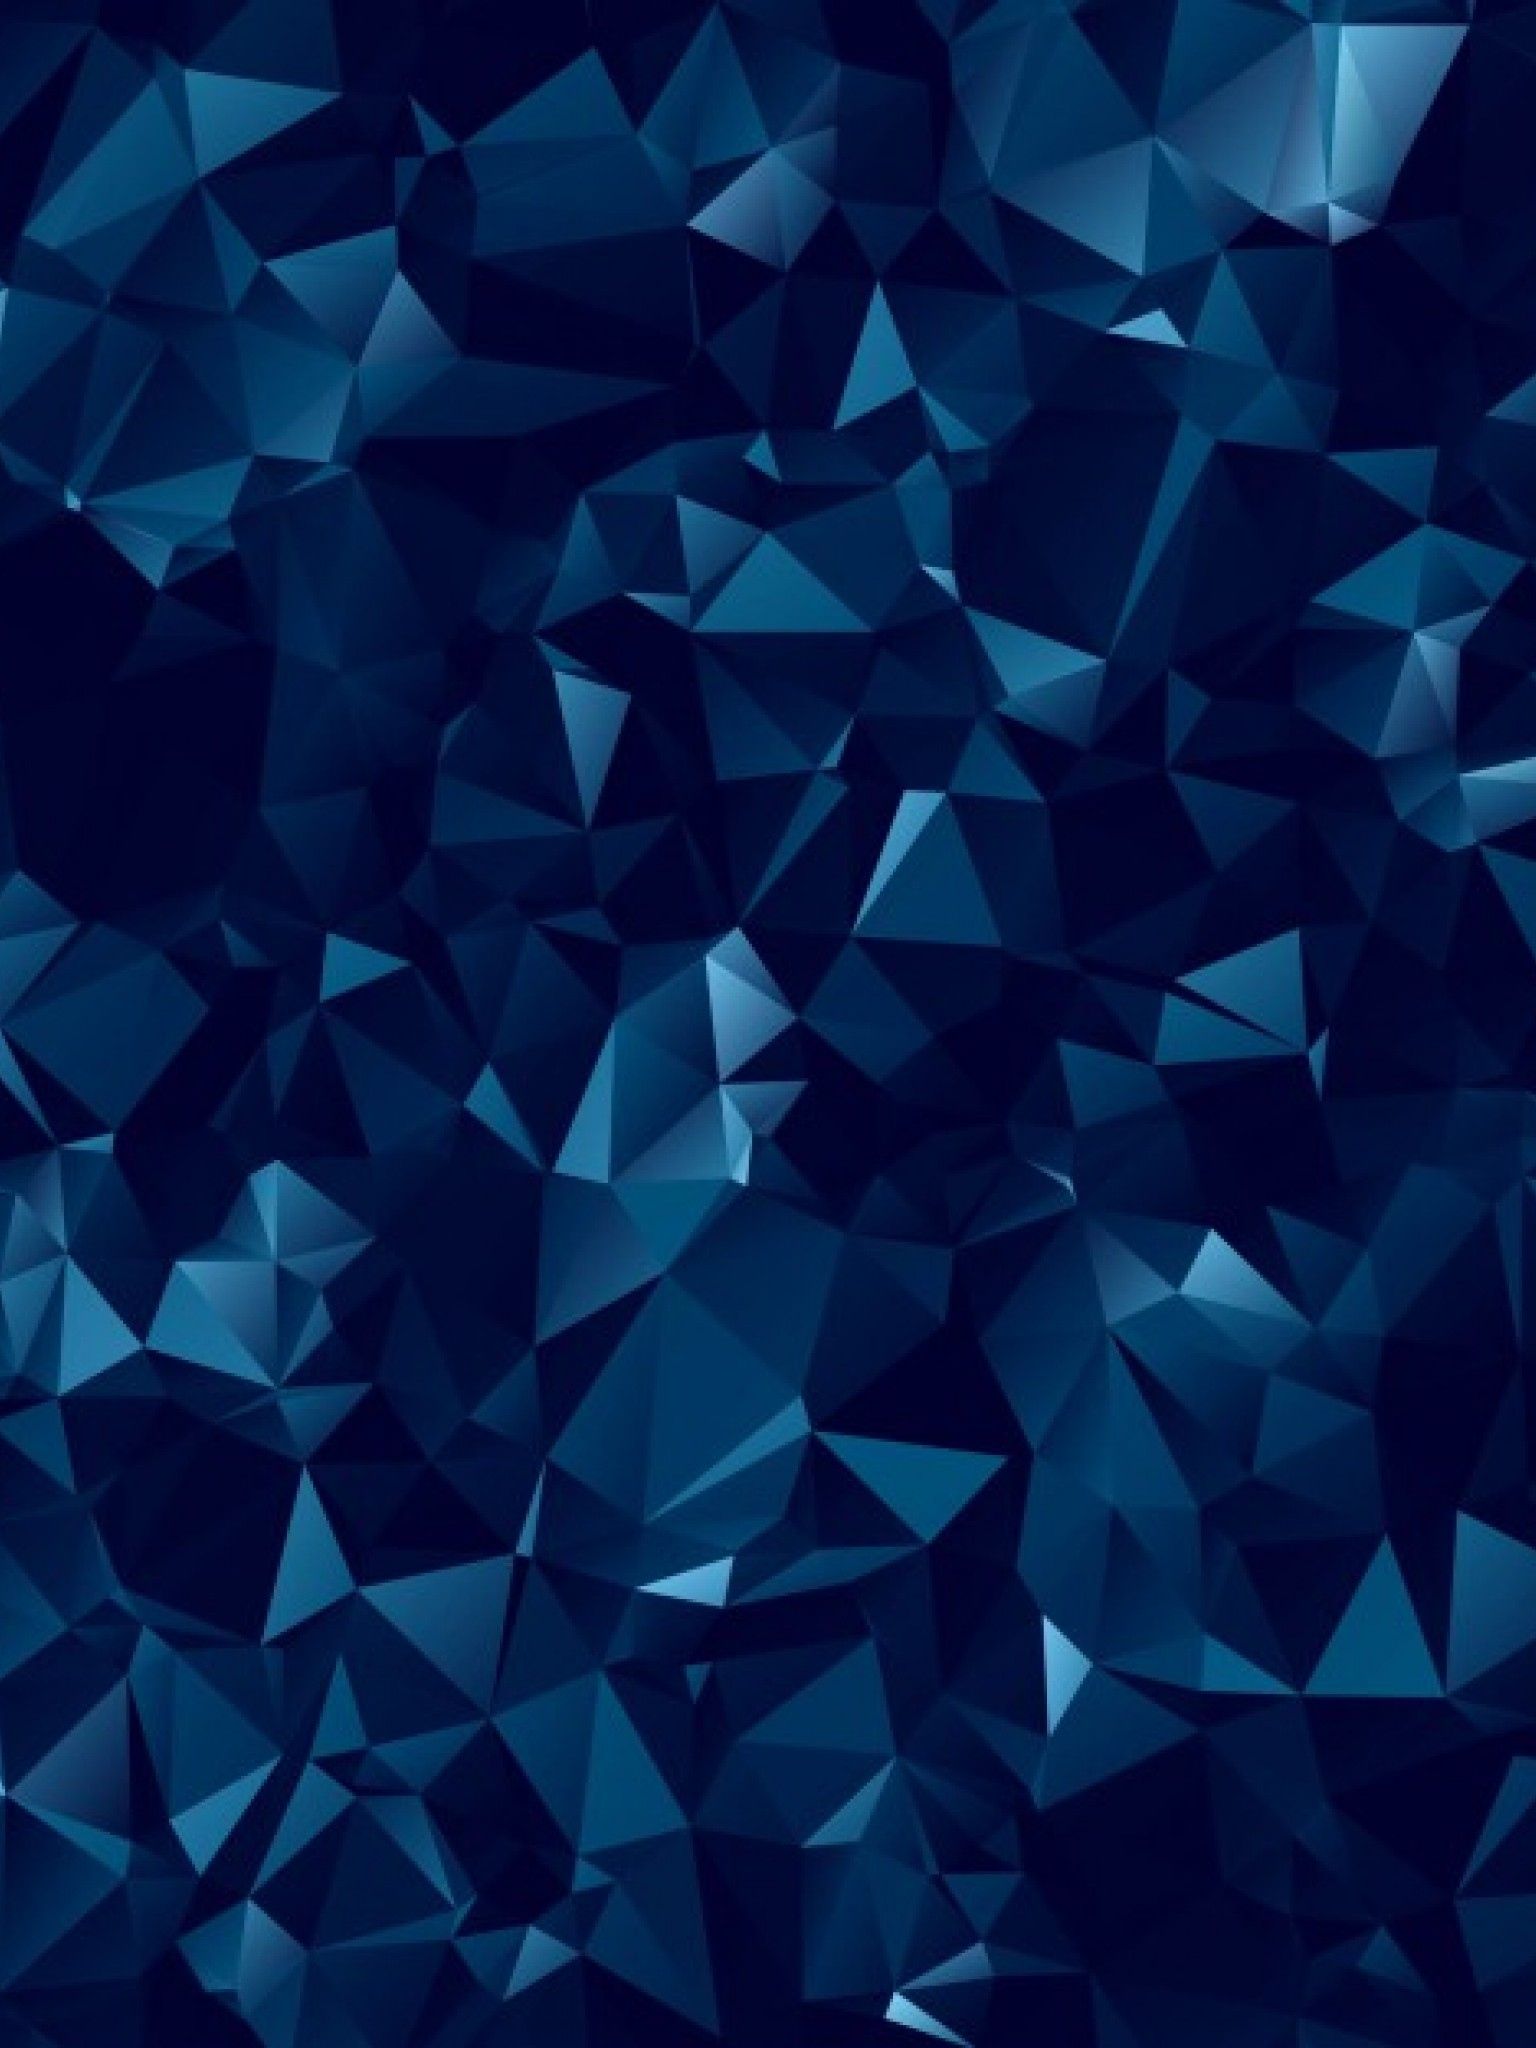 Navy blue abstract wallpaper with a geometric low poly design - Vector